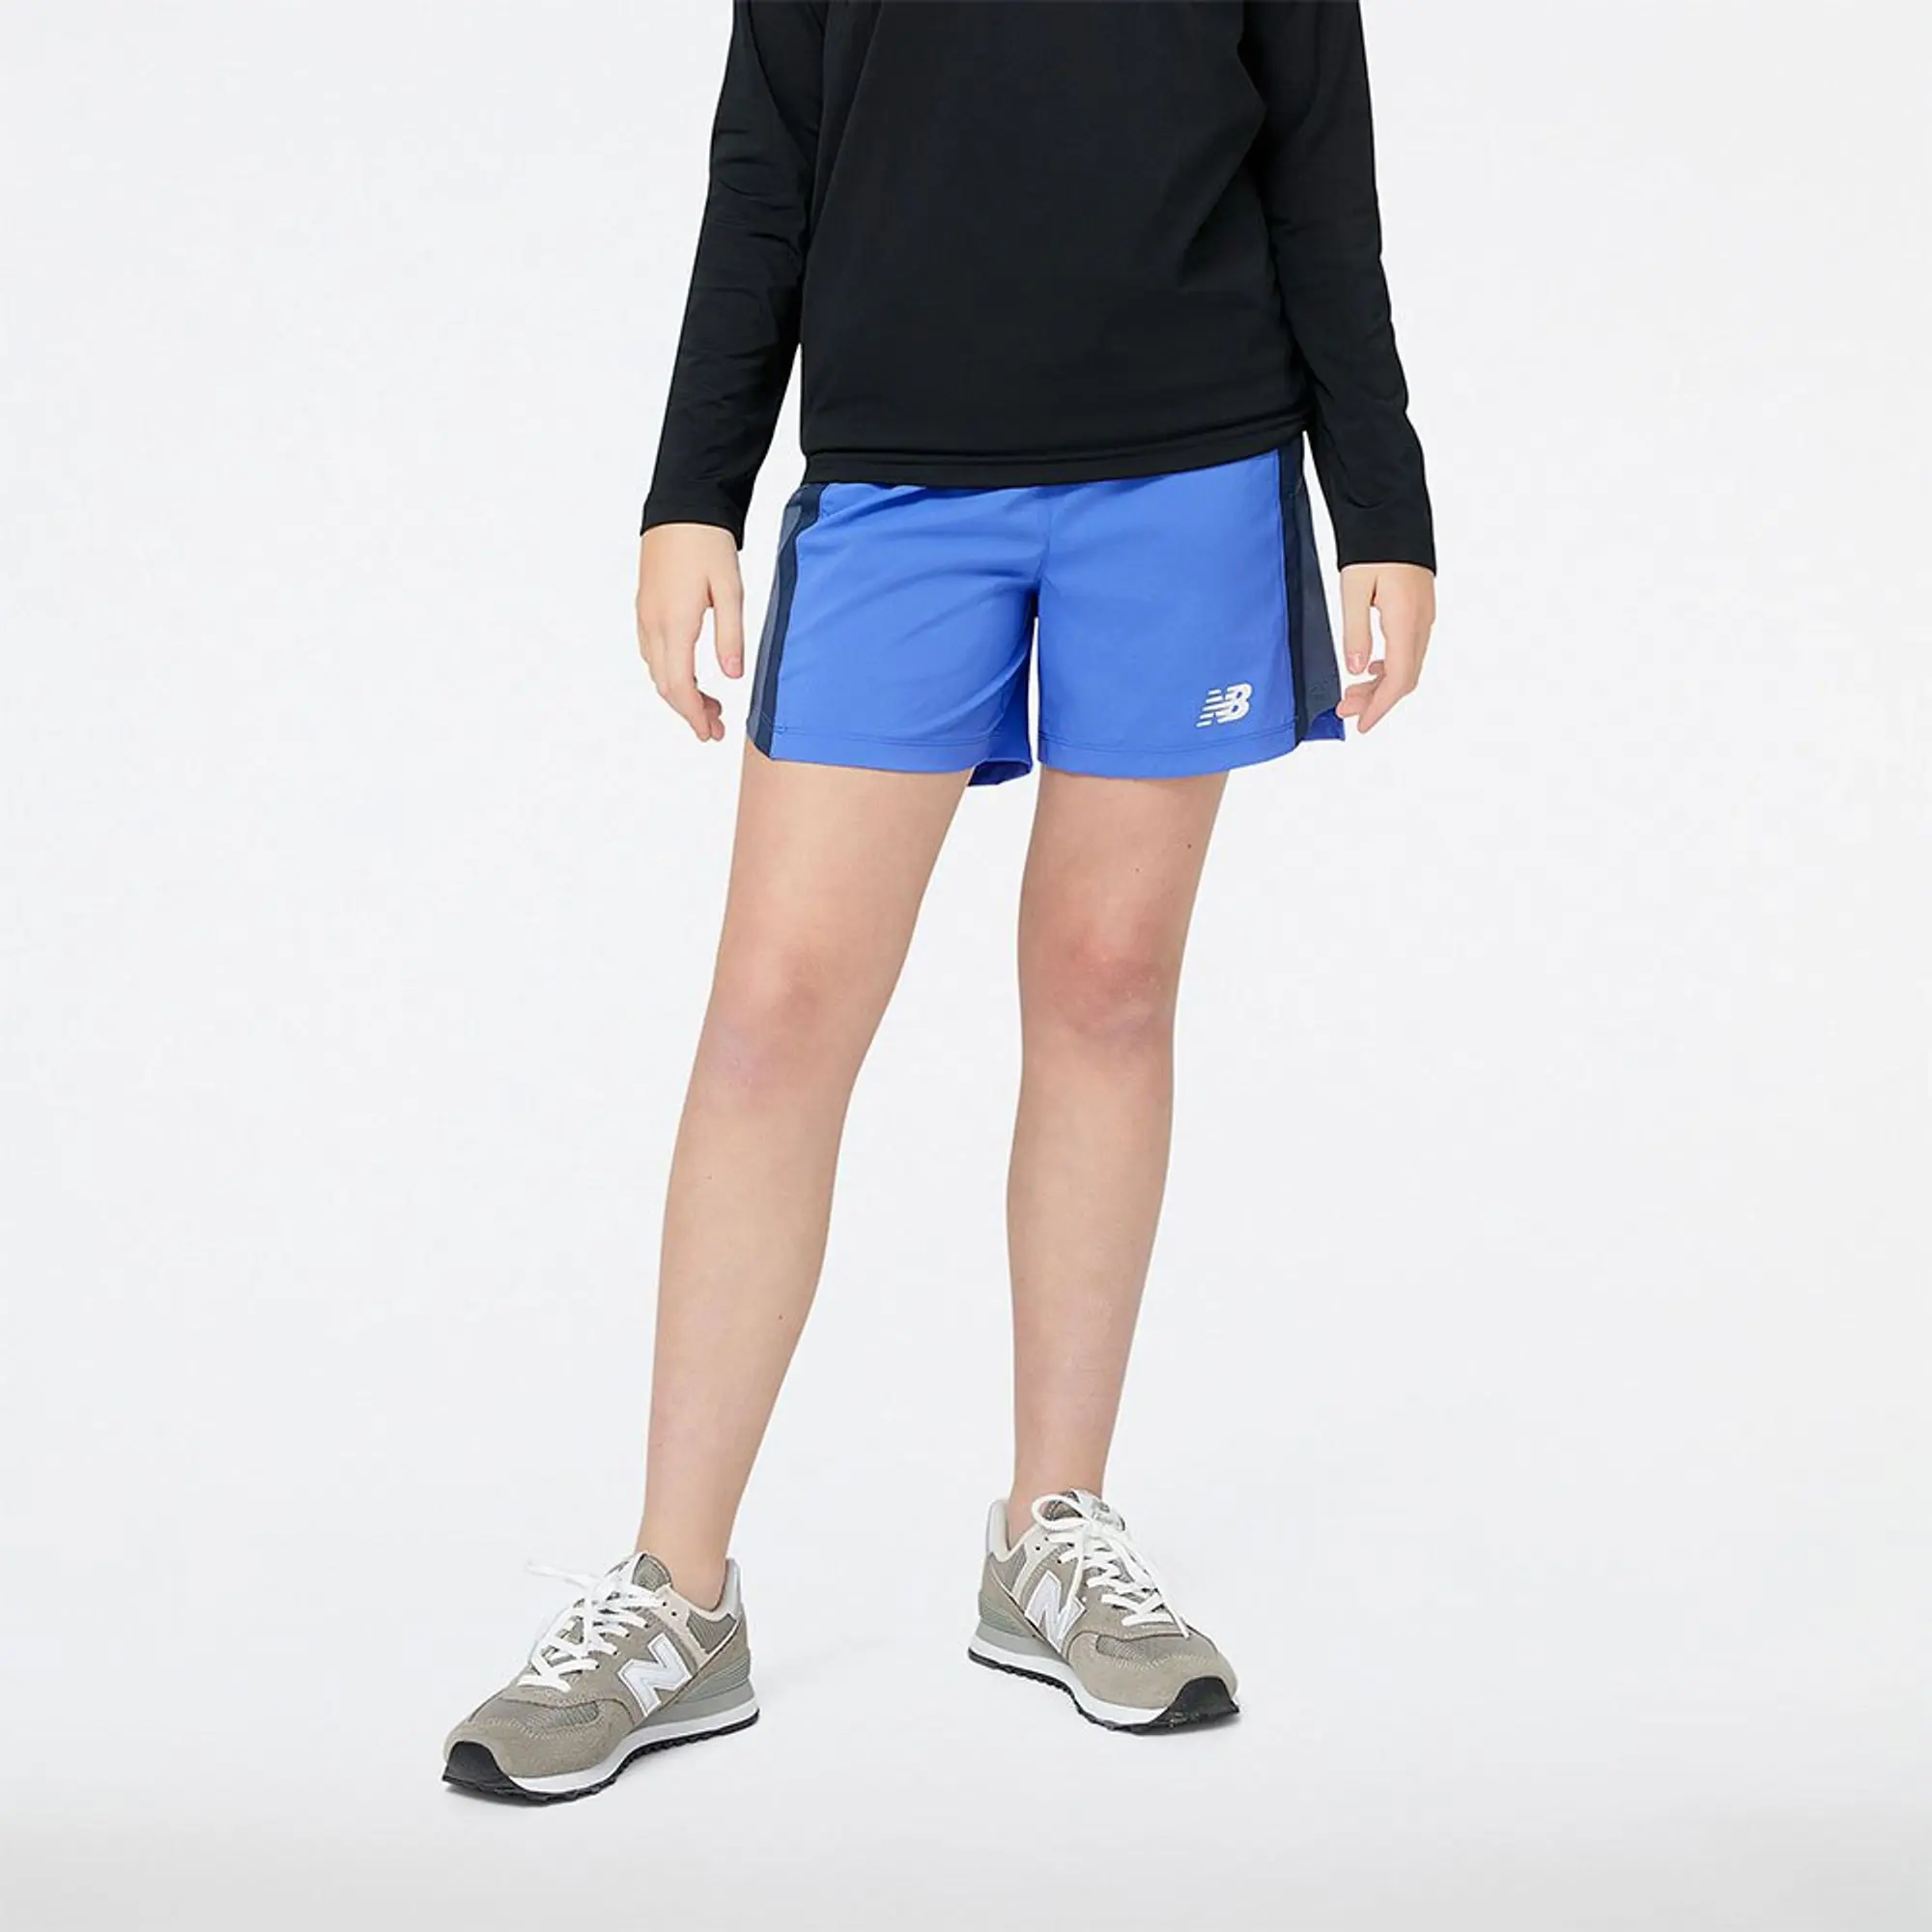 New Balance Unisex Accelerate Short in Black Polywoven